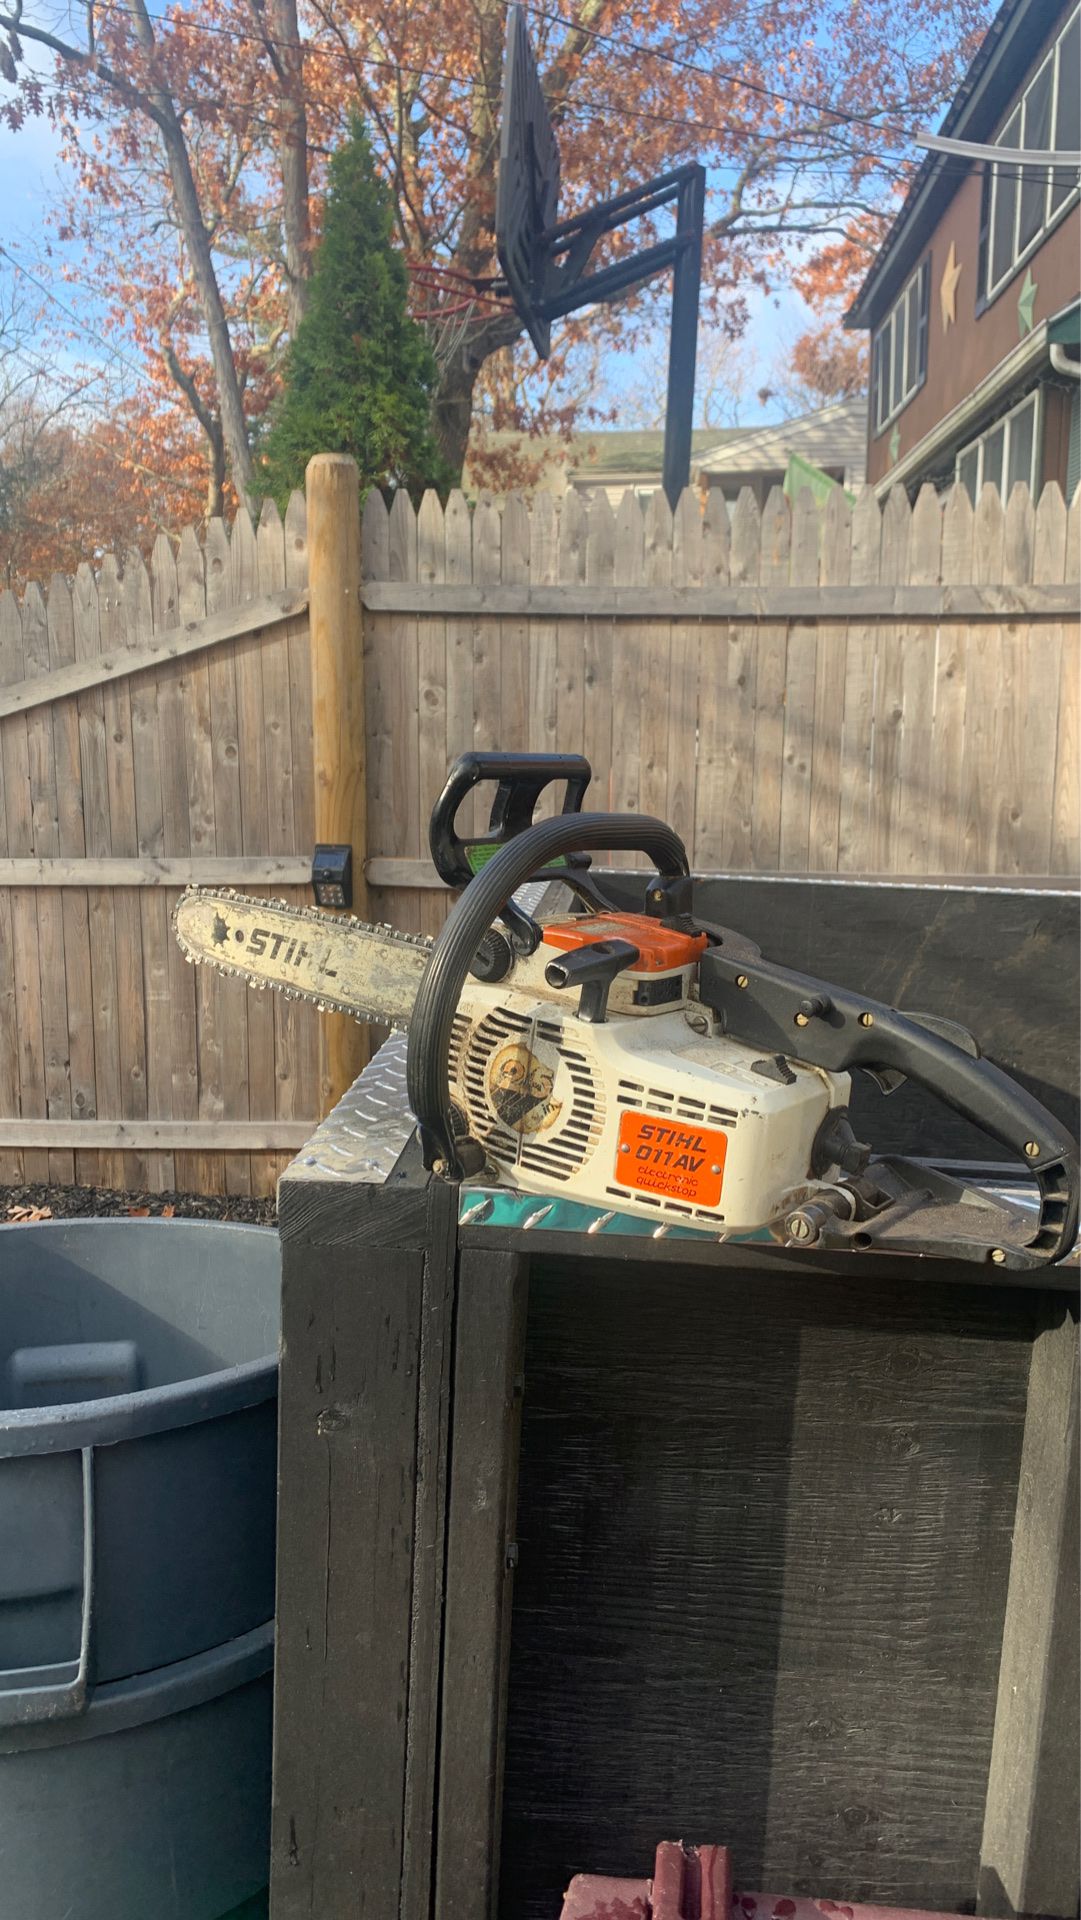 Stihl16 inch chainsaw (not working currently)